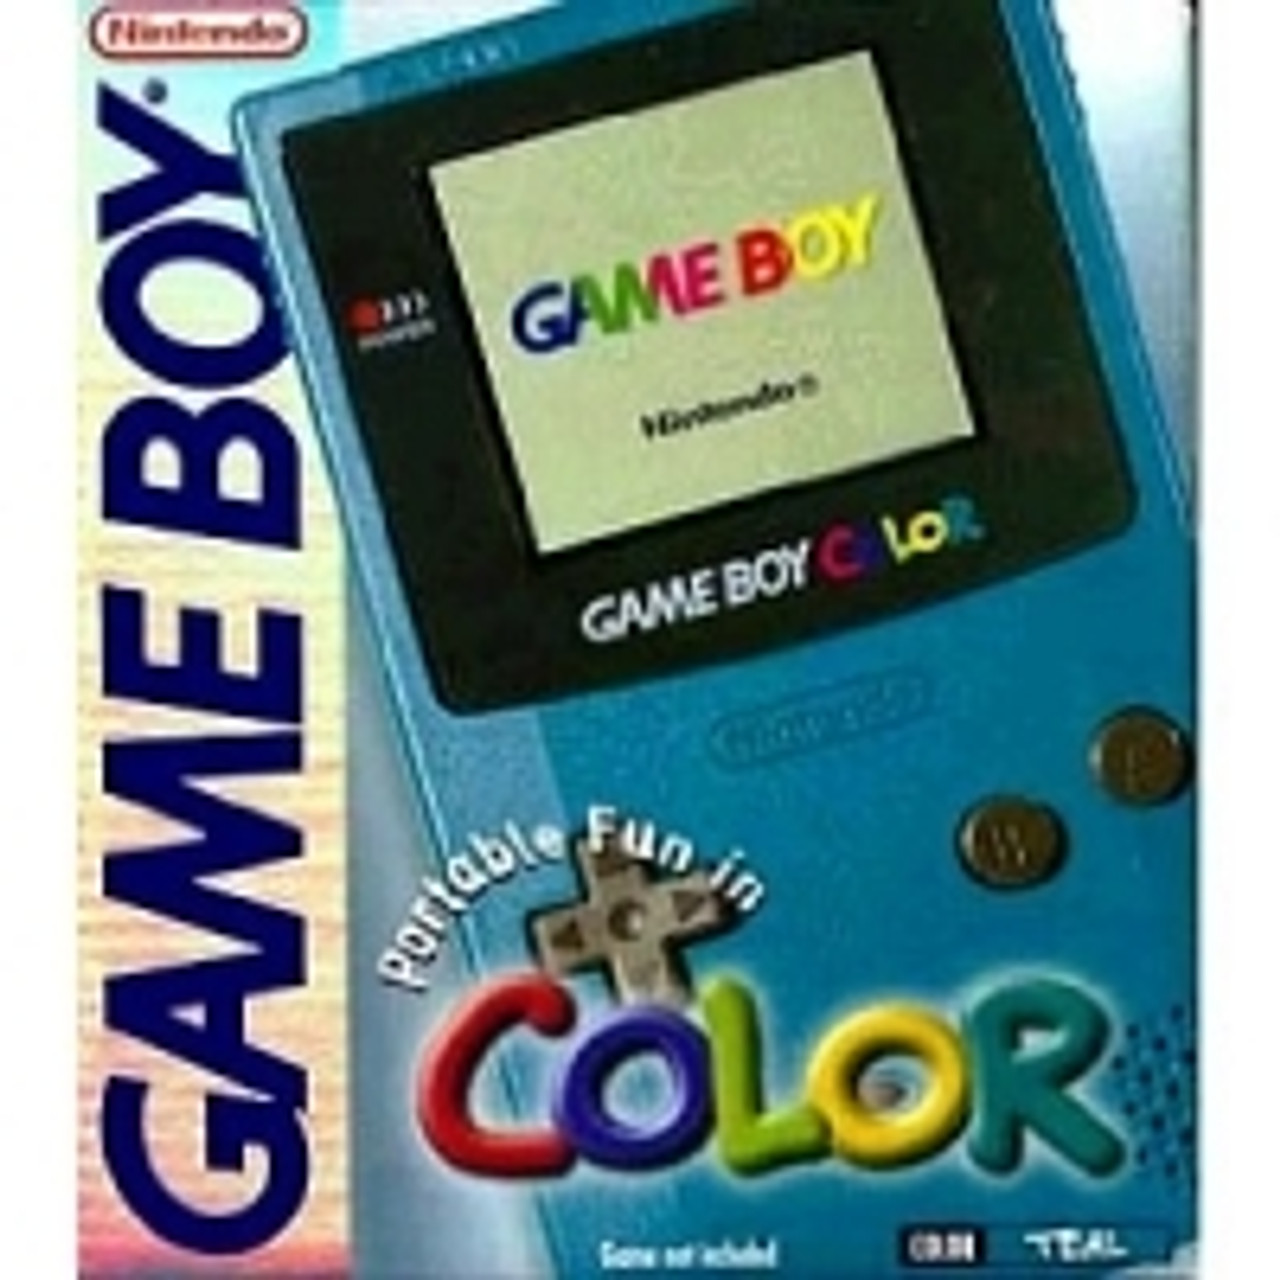 GameBoy Color Light, DKOldies.com posted an episode of Retro Oddities., By DKOldies.com